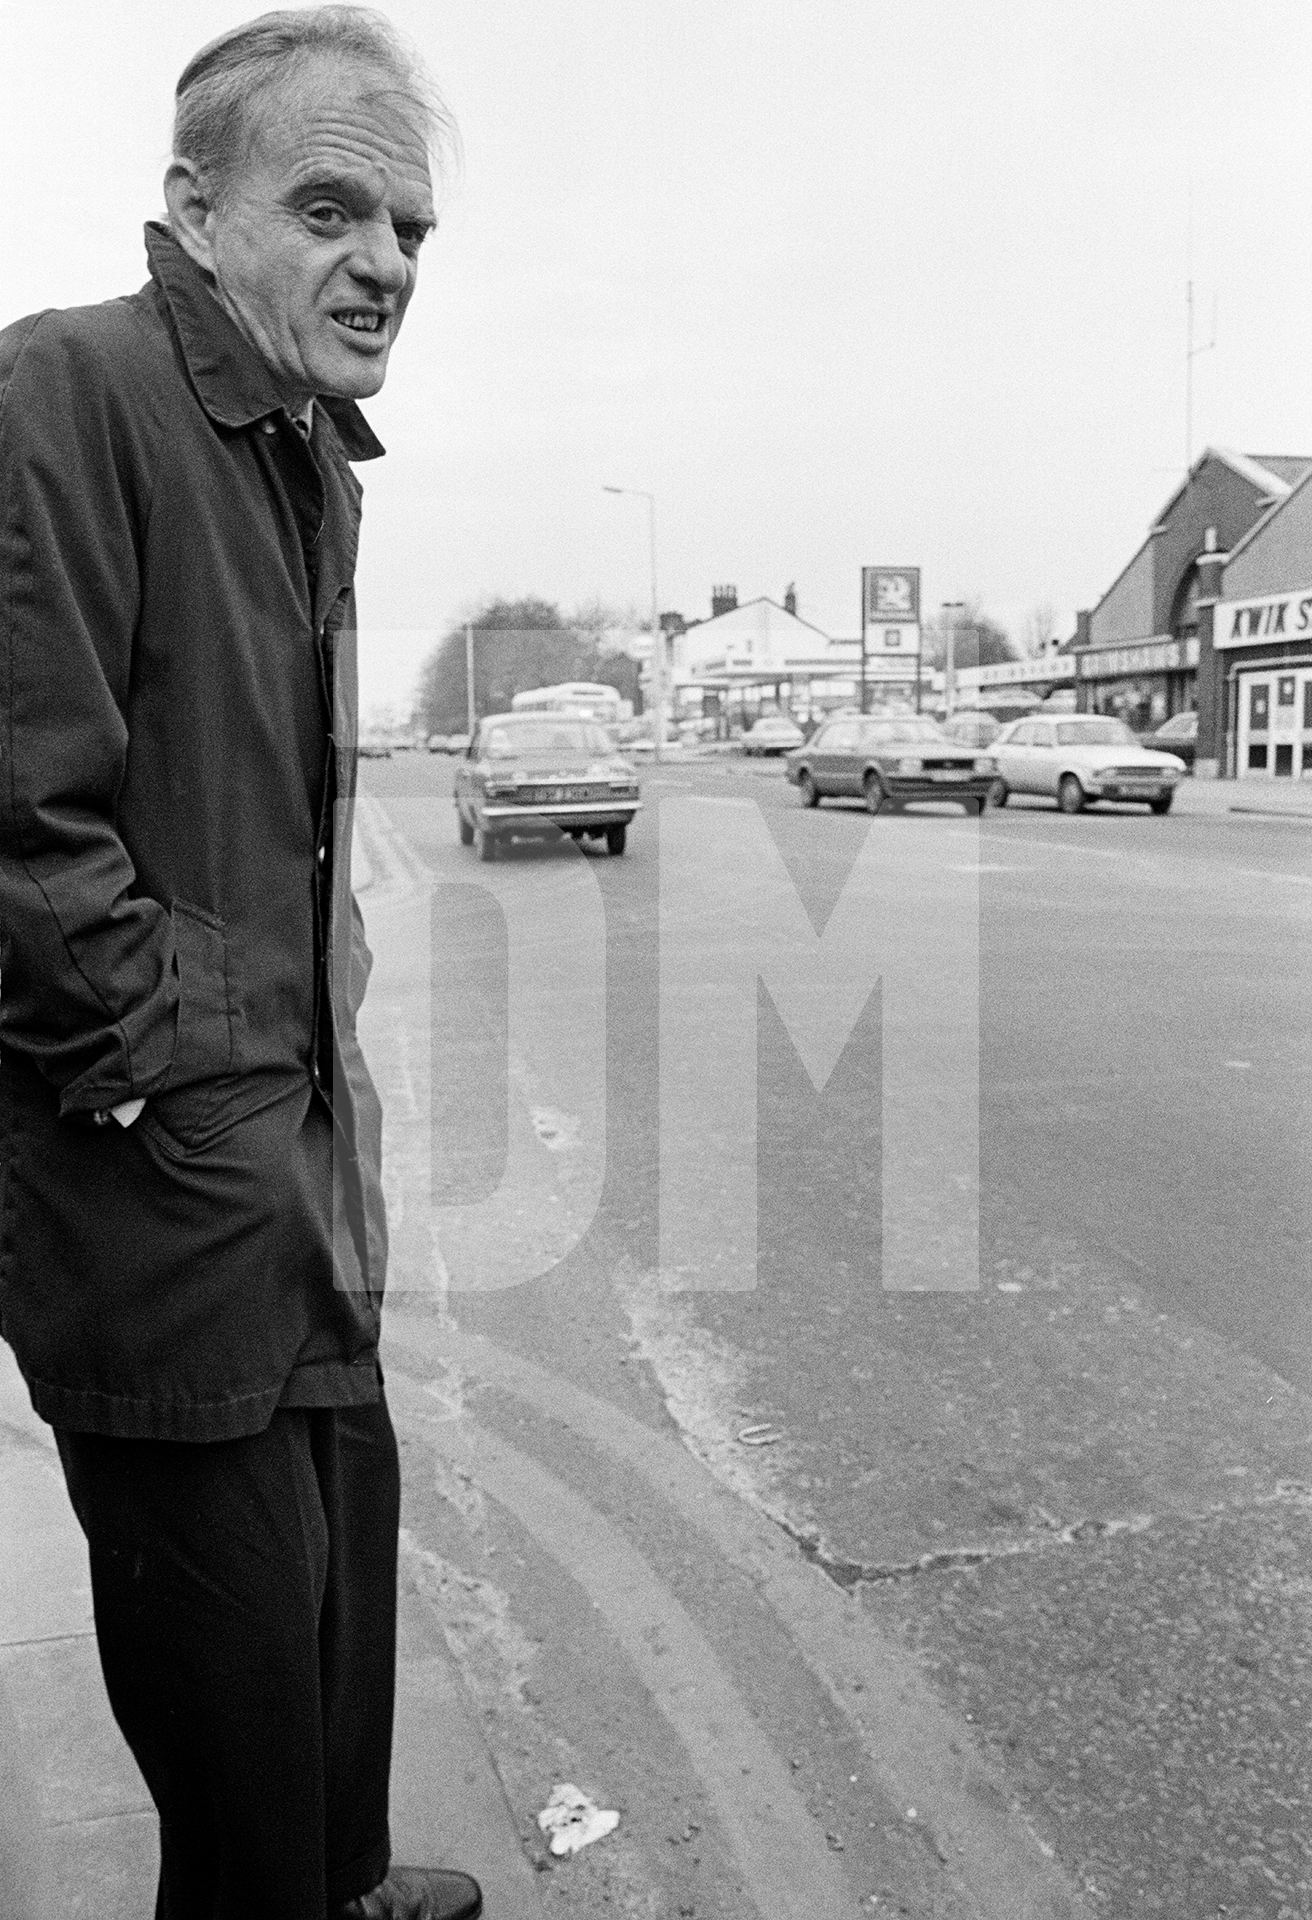 George Quann, aged 52 a former labourer who was admitted in 1952 thinks he is a toy soldier and complains about the weight of his metal limbs. He doesn’t like being outside. February 1978 by Daniel Meadows